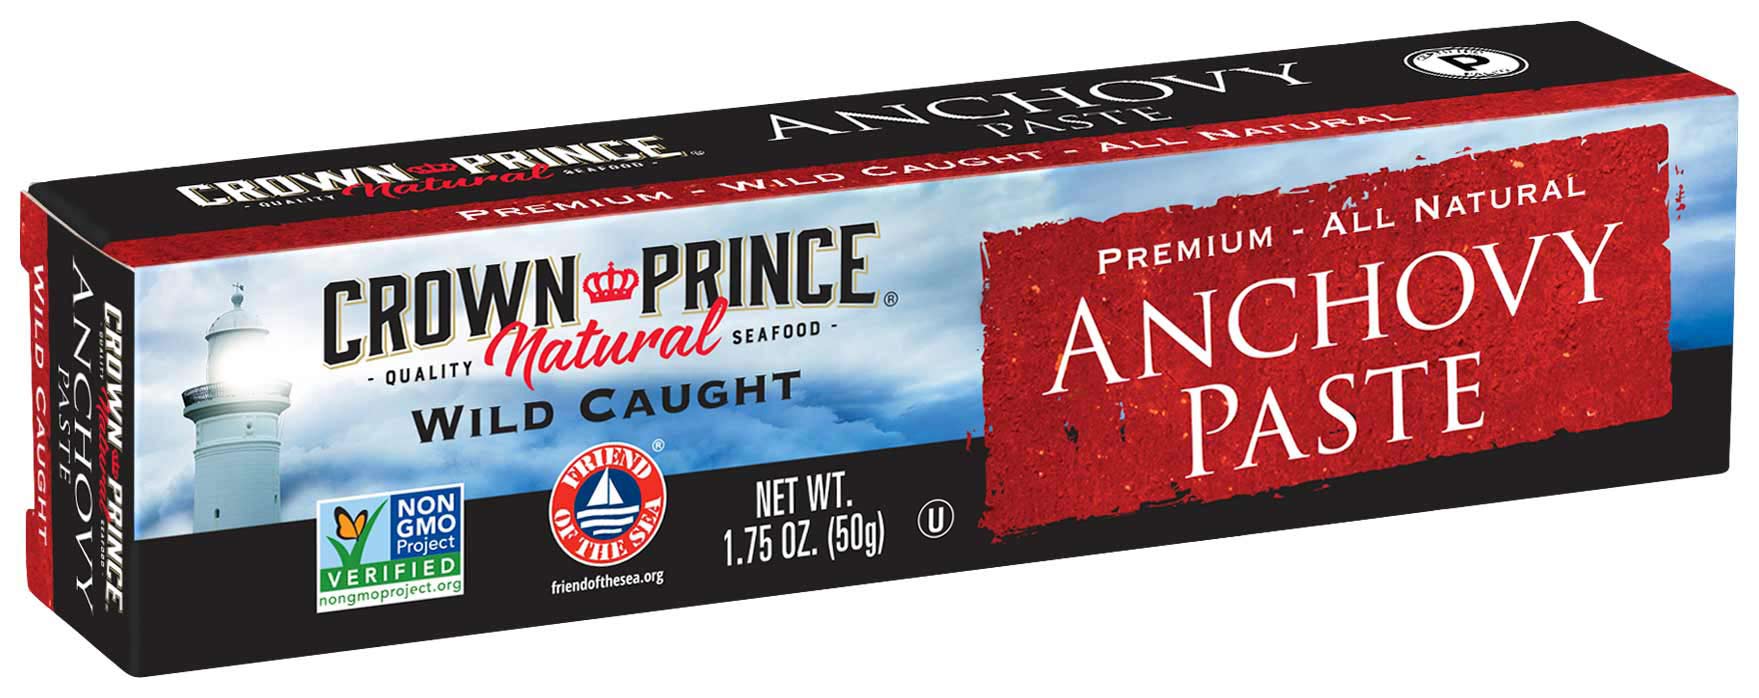 Crown Prince Natural Anchovy Paste